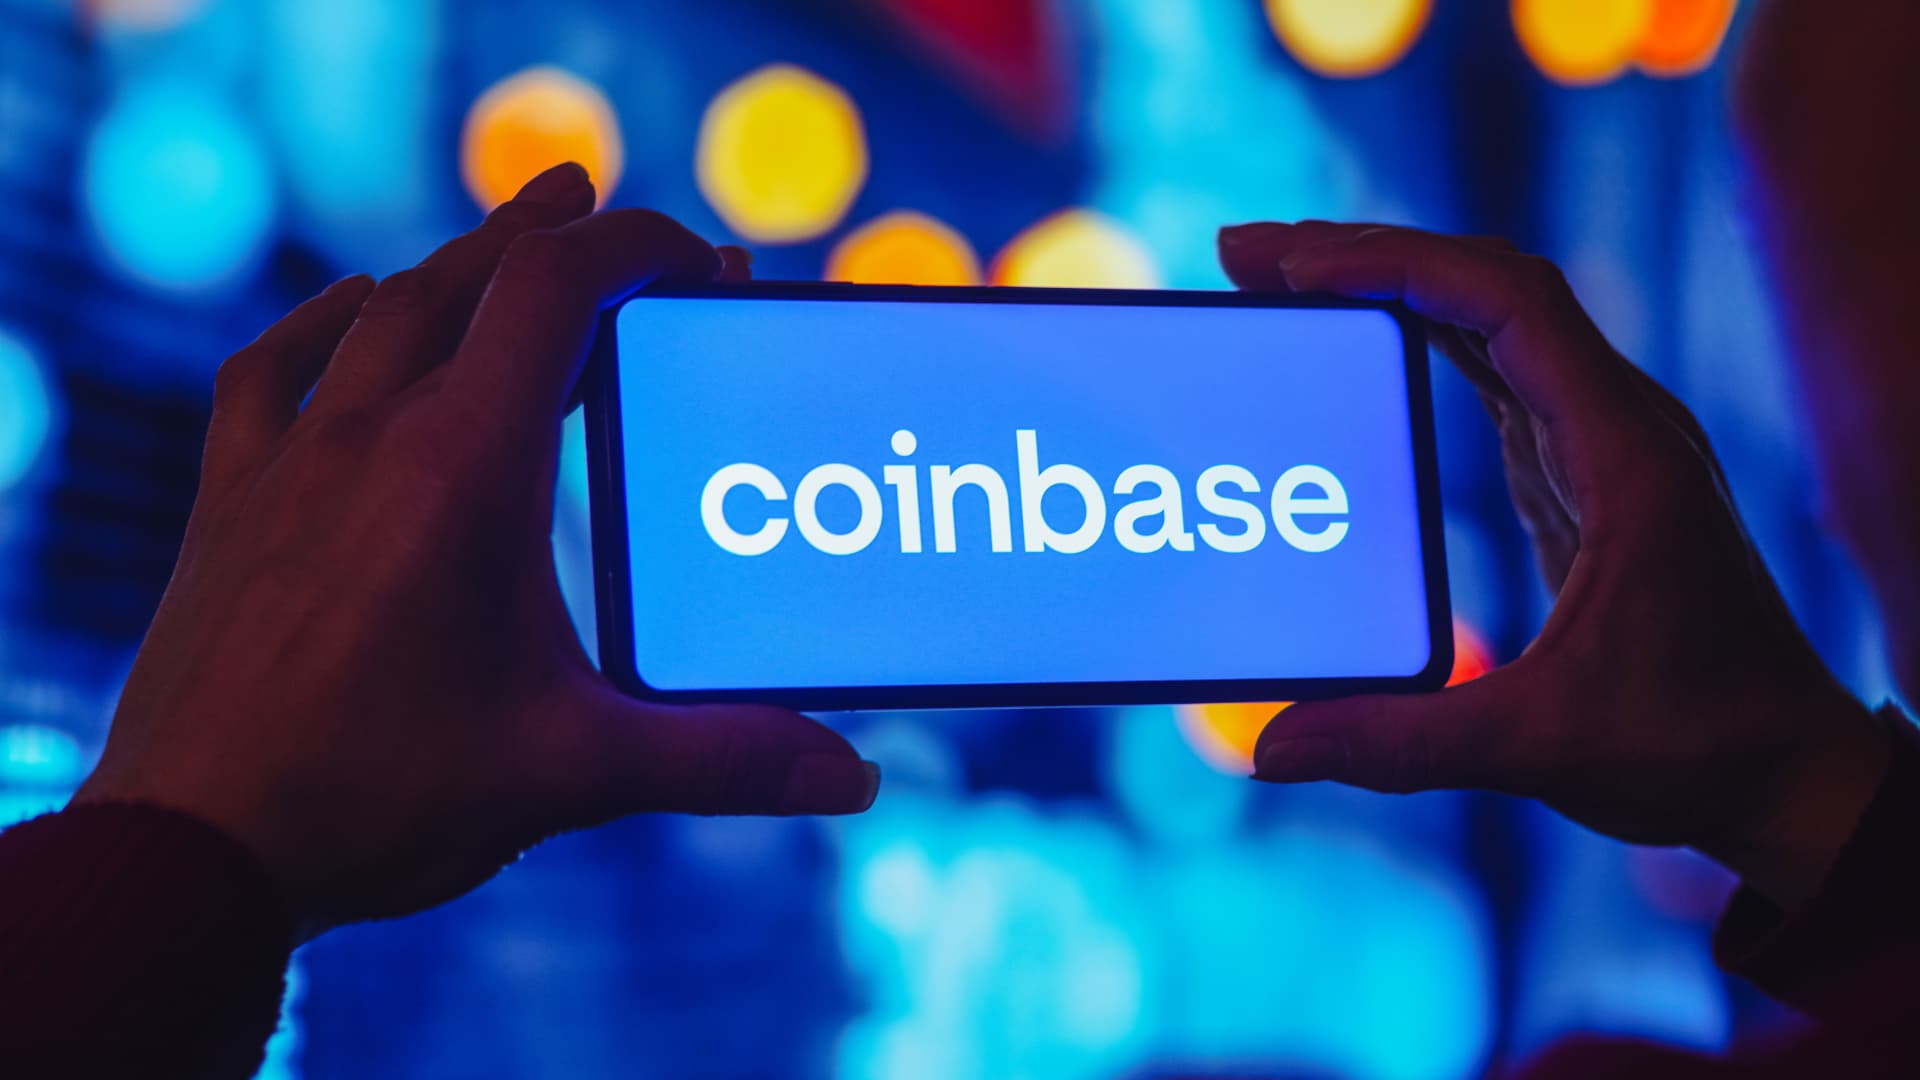 Coinbase Pictures  Download Free Images on Unsplash